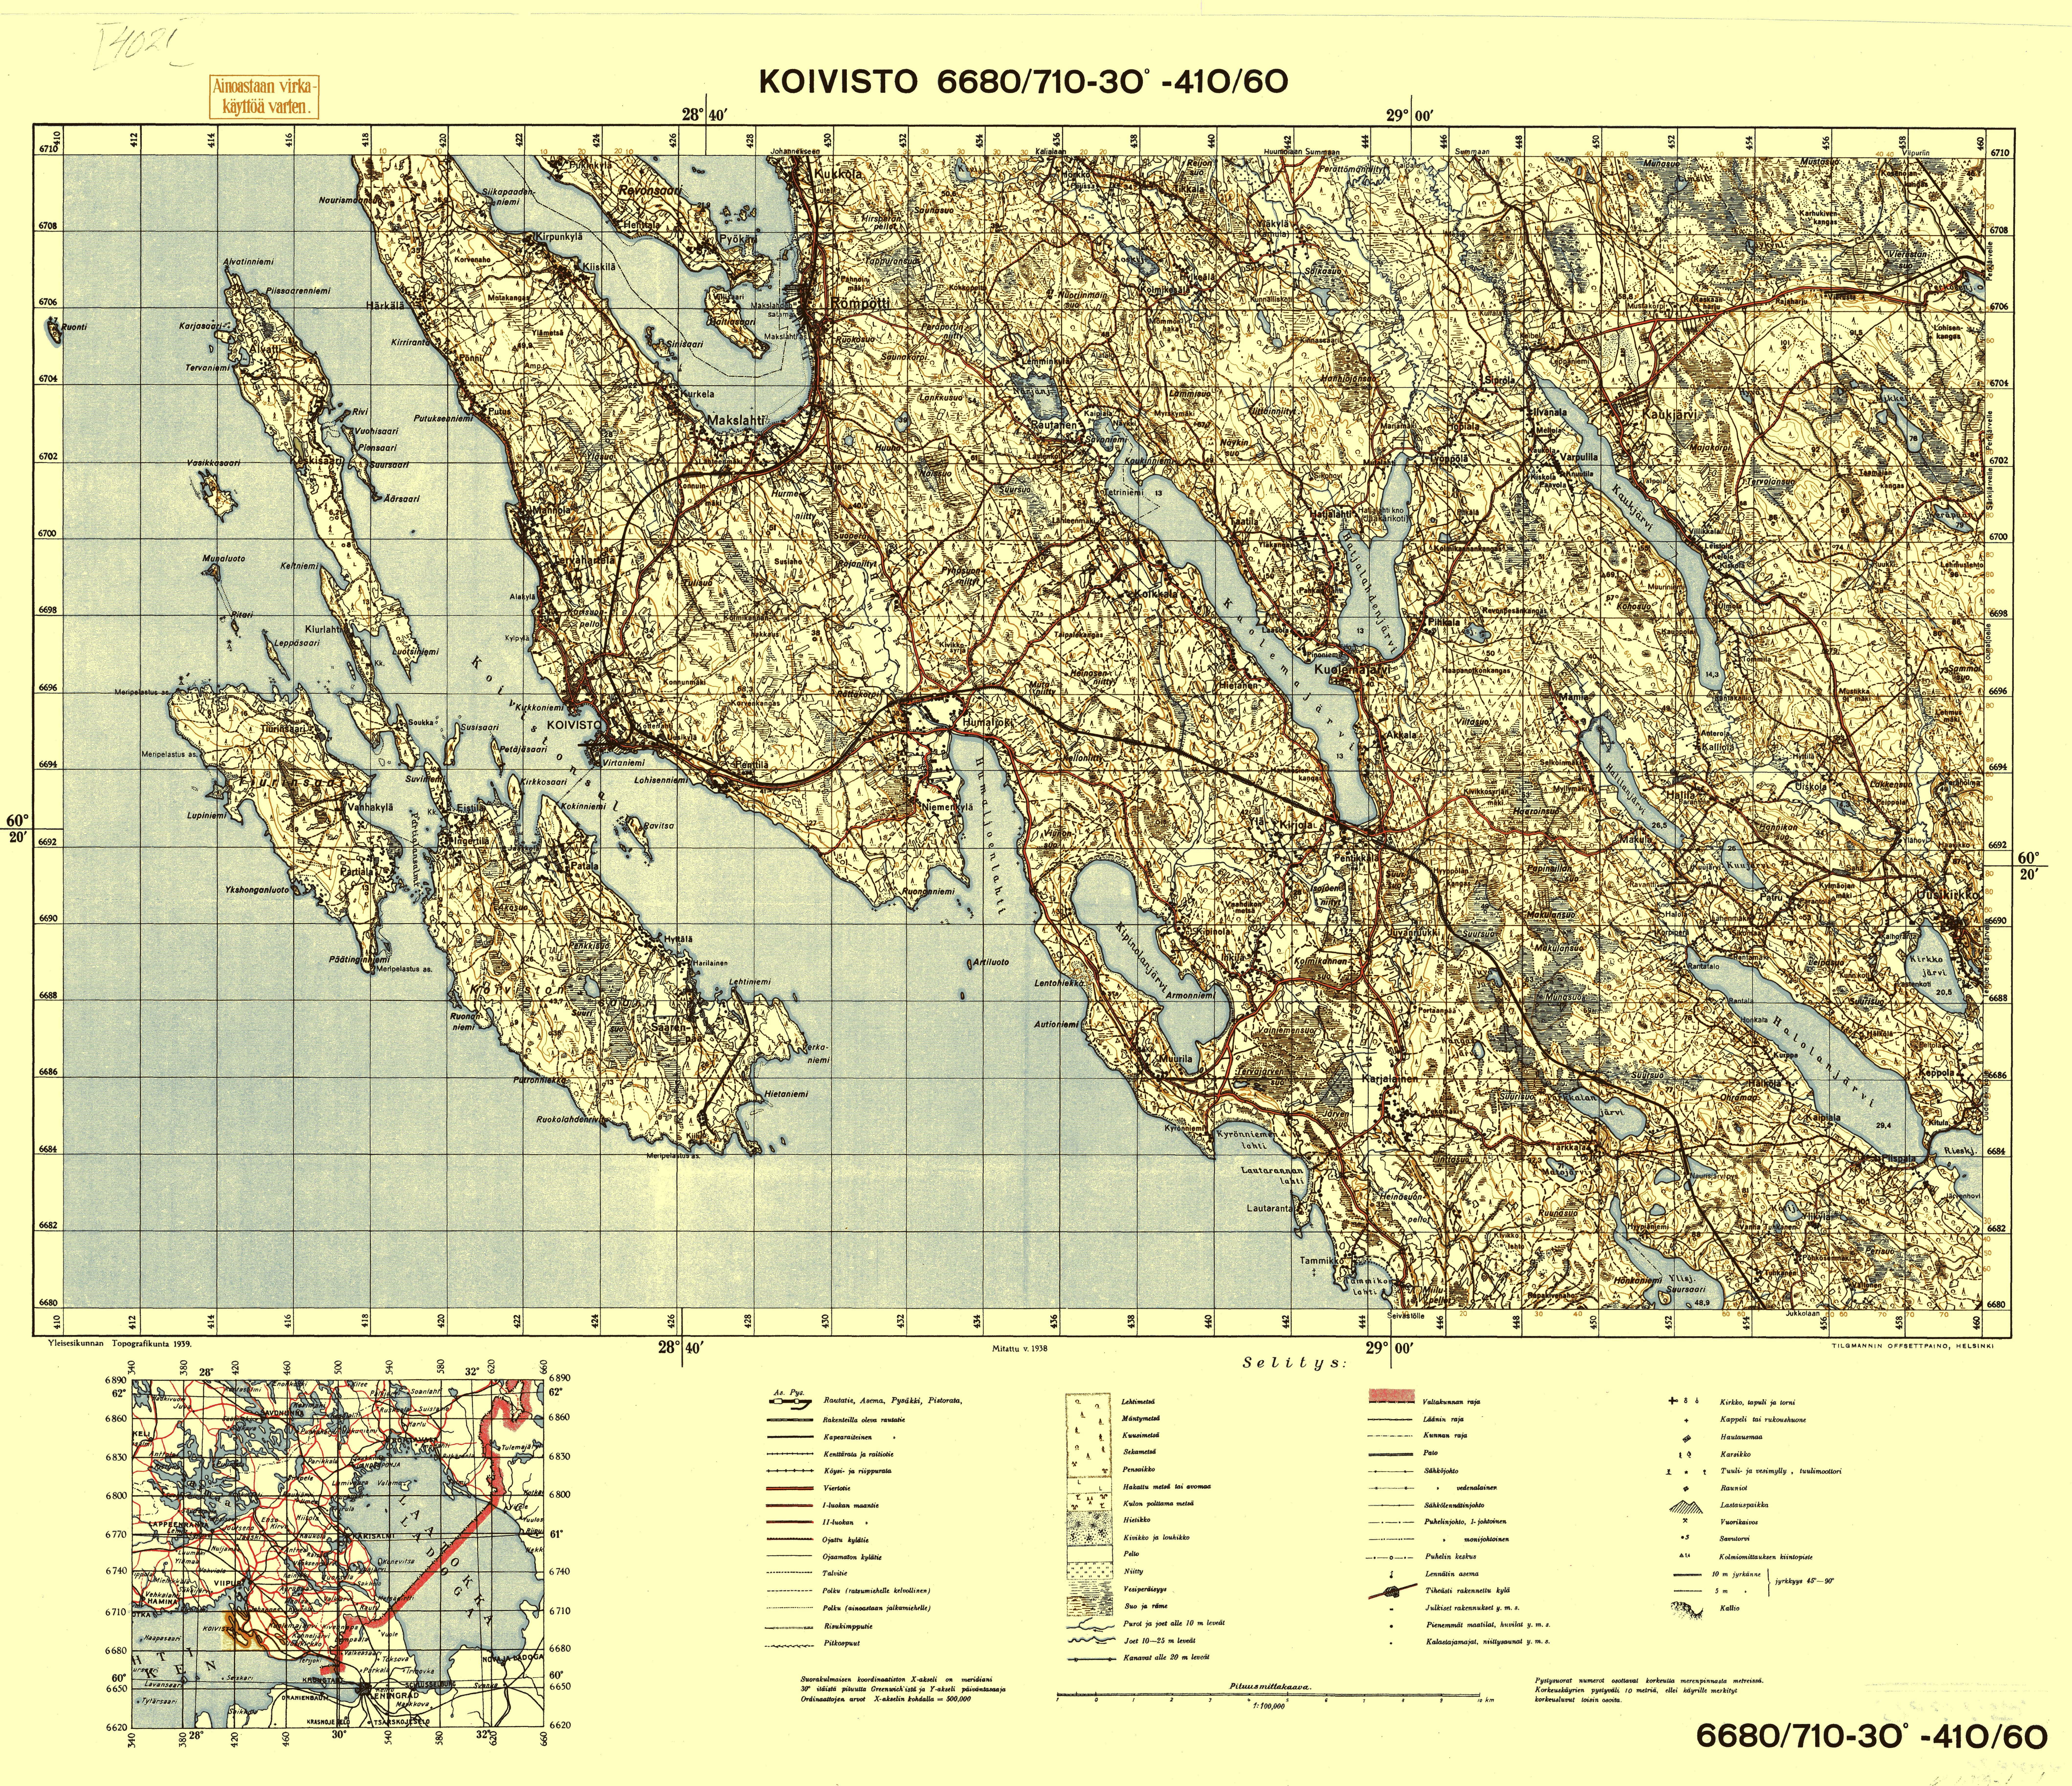 Primorsk. Koivisto. Topografikartta 4021. Topographic map from 1939. Use the zooming tool to explore in higher level of detail. Obtain as a quality print or high resolution image